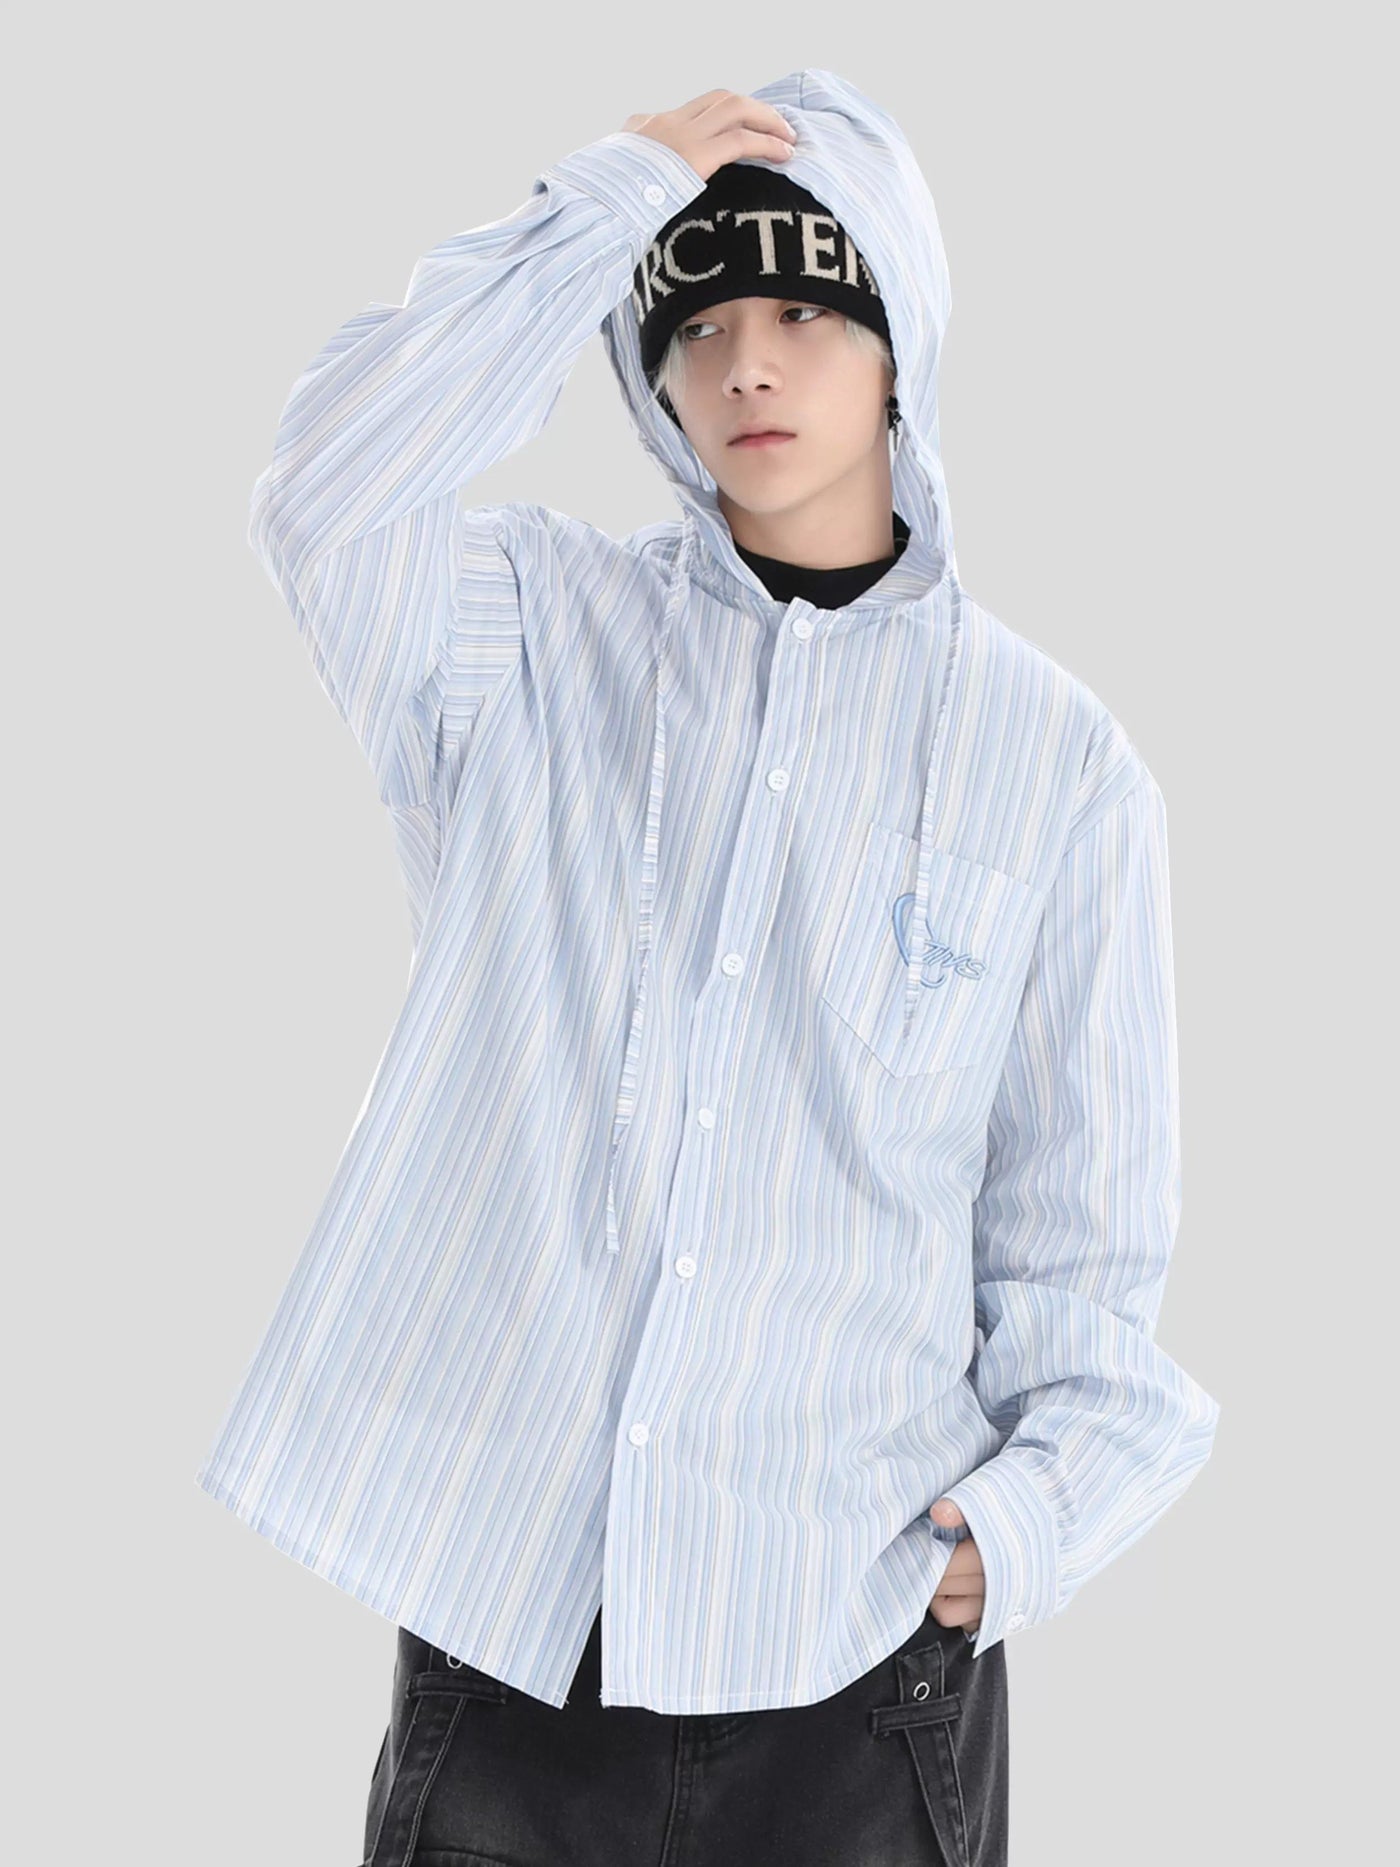 Striped and Hooded Shirt Korean Street Fashion Shirt By INS Korea Shop Online at OH Vault